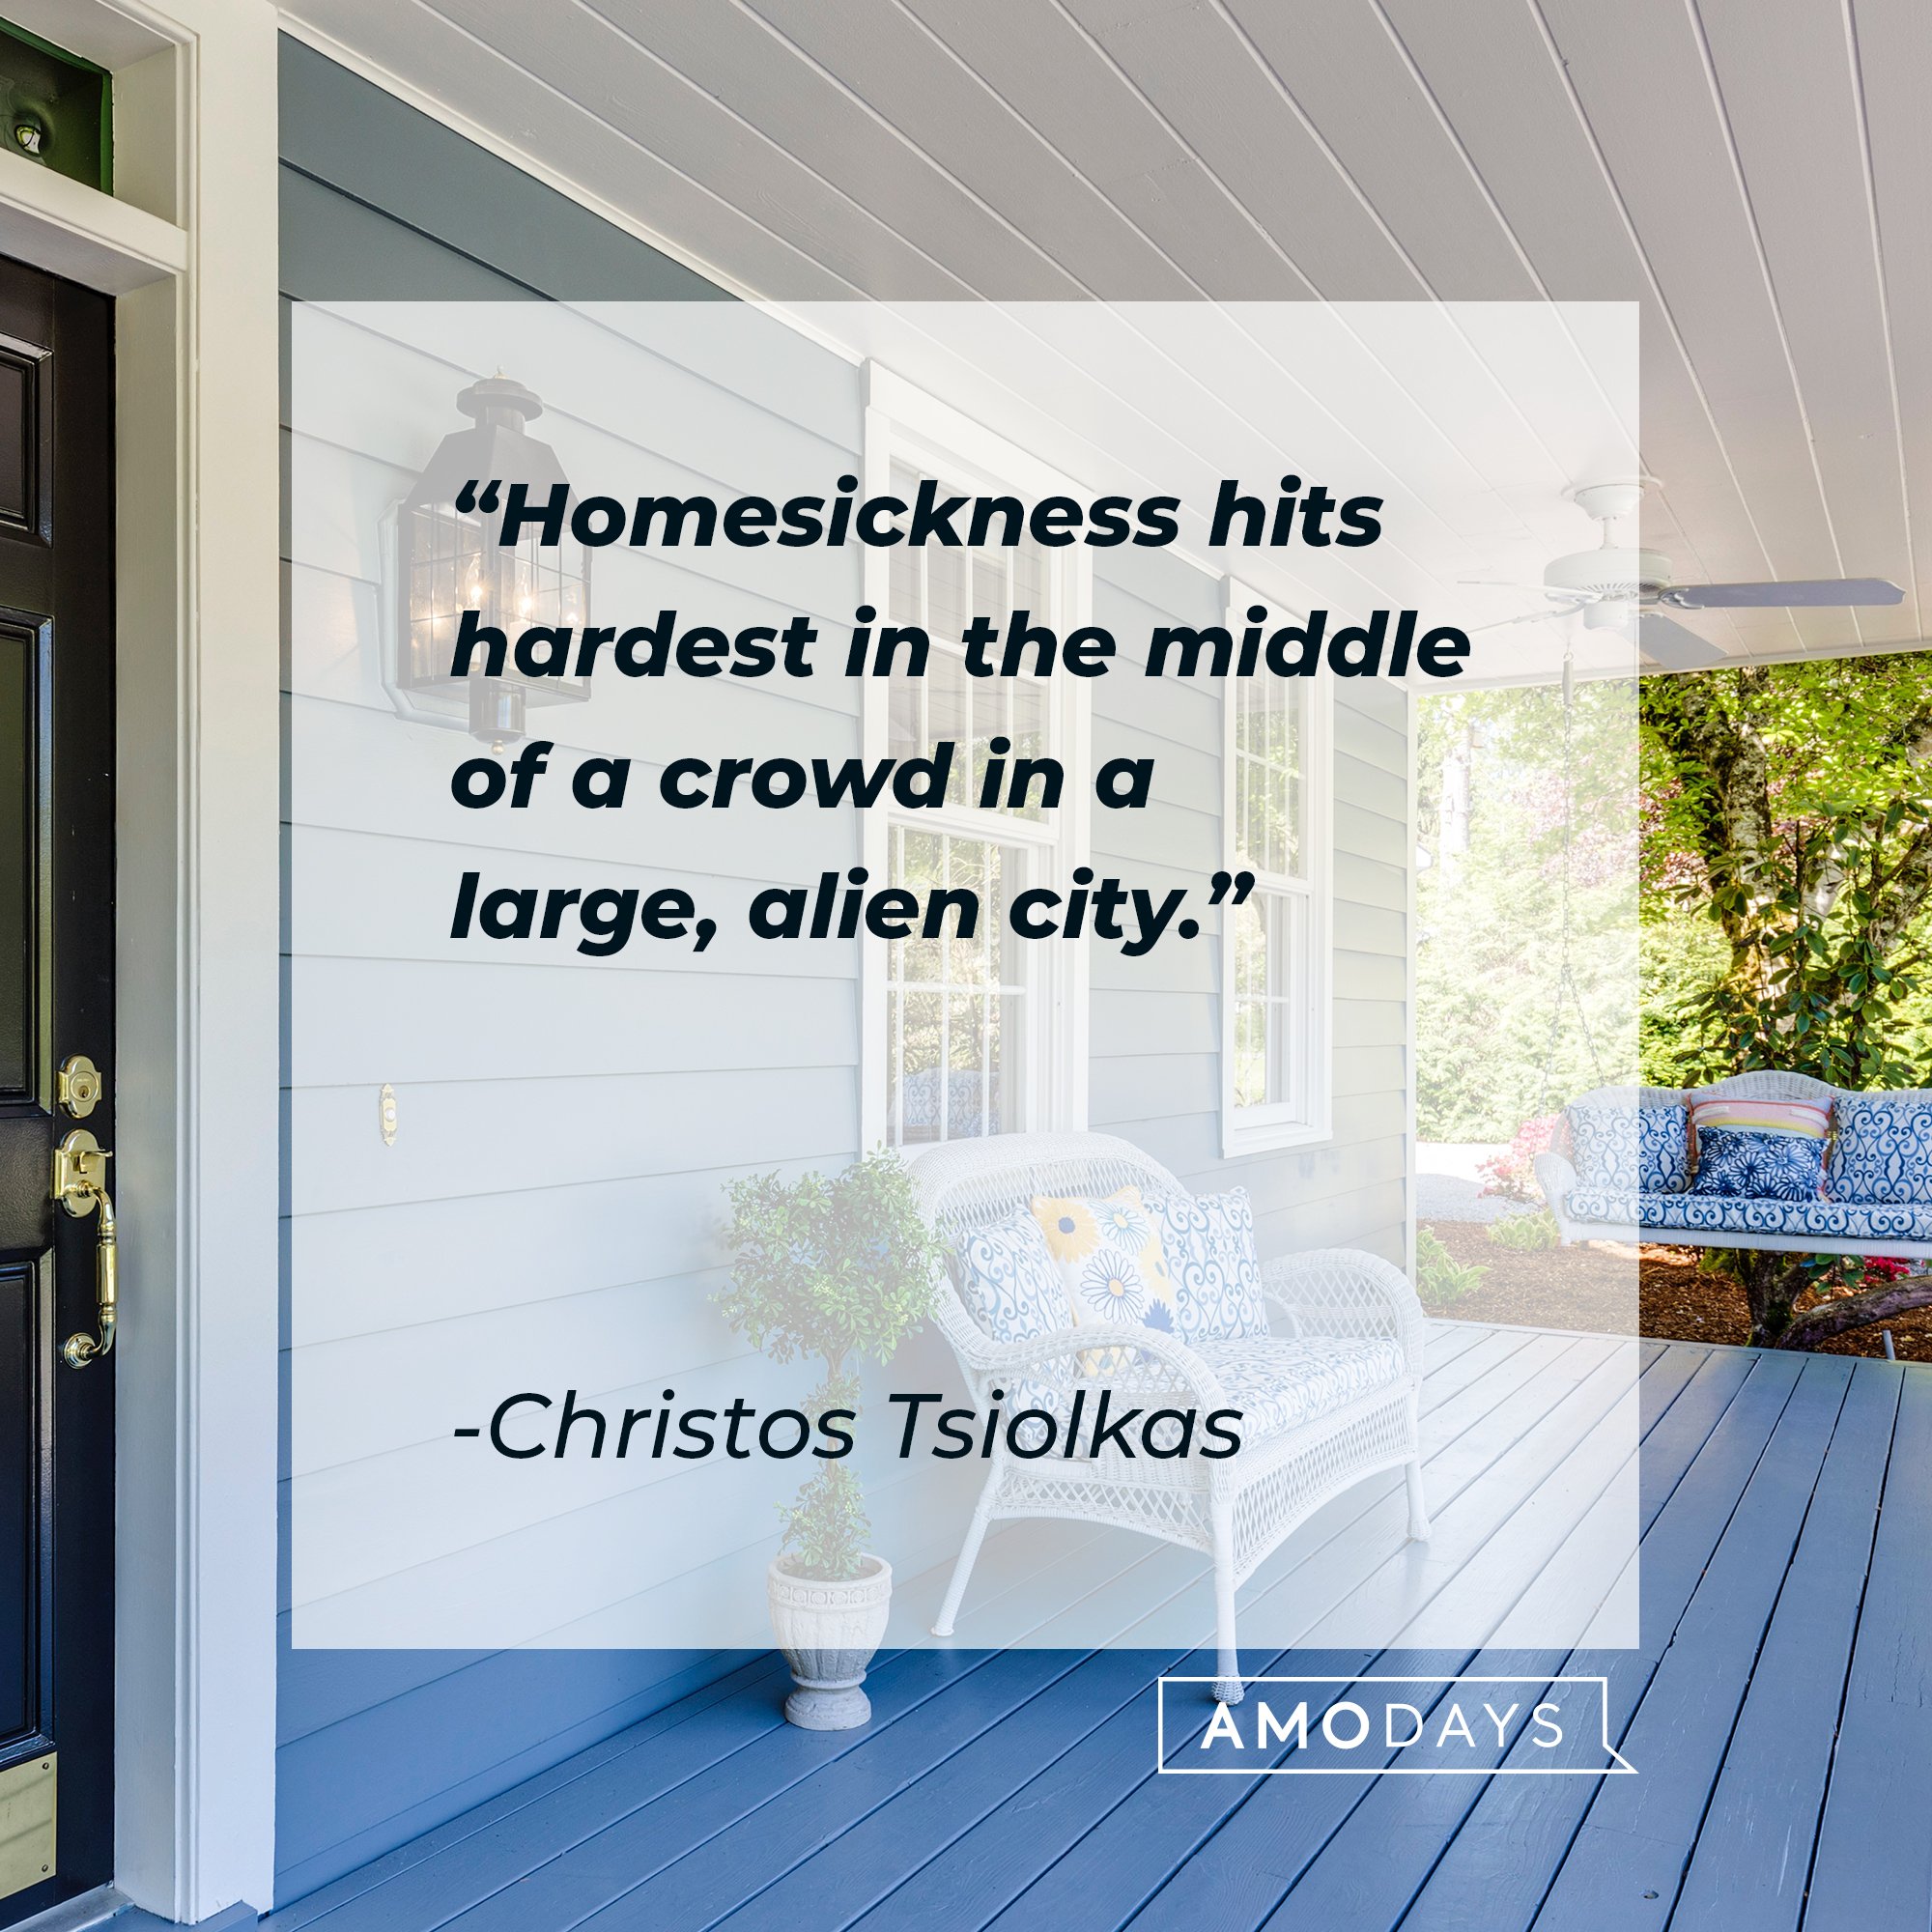 Christos Tsiolkas' quote: "Homesickness hits hardest in the middle of a crowd in a large, alien city." | Image: AmoDays